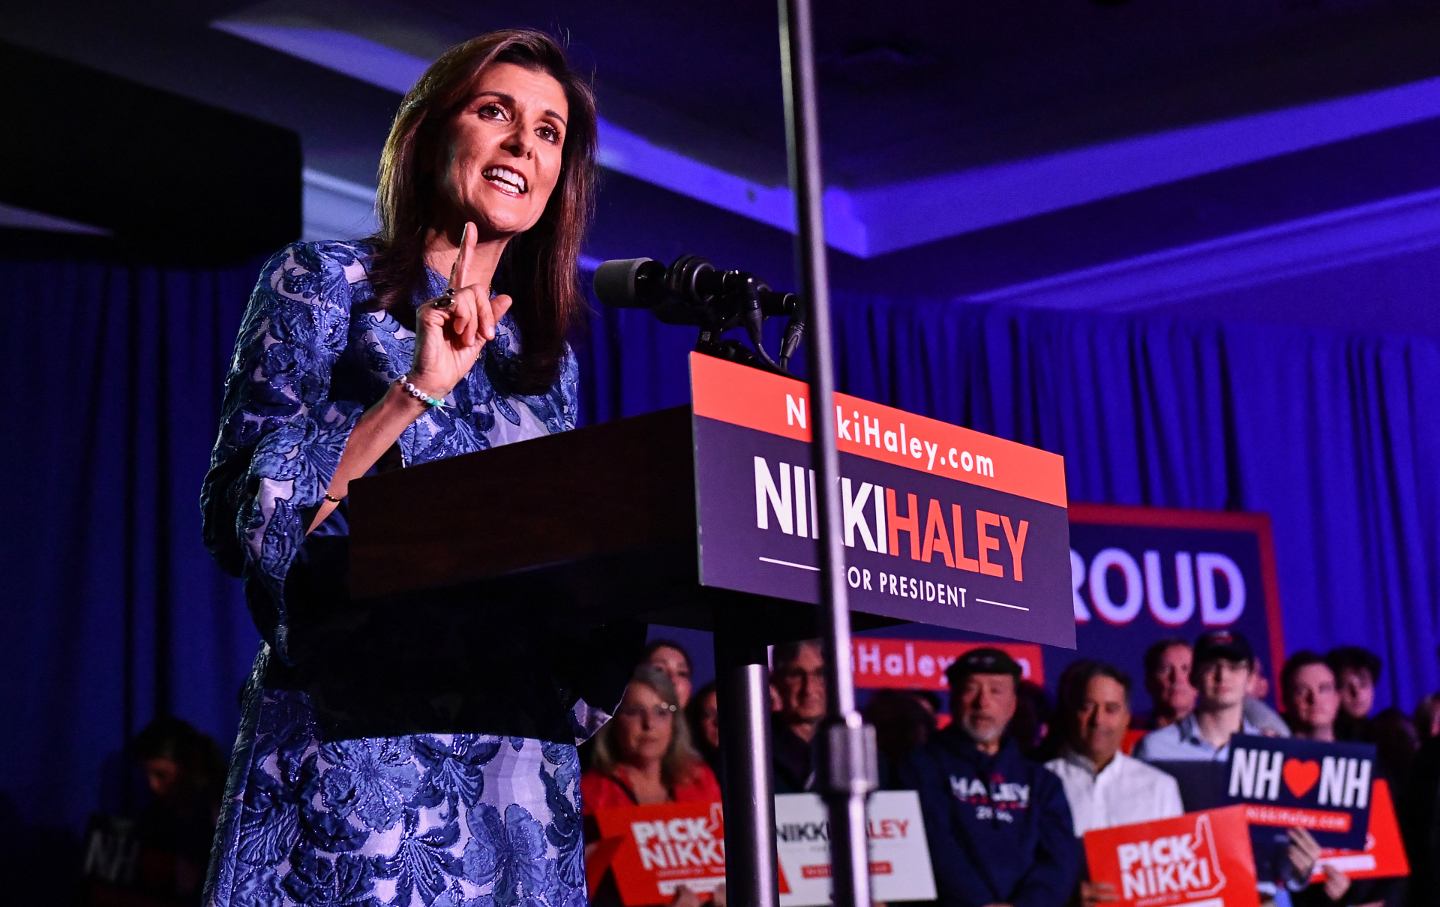 Nikki Haley speaking at a podium at an event for voters.